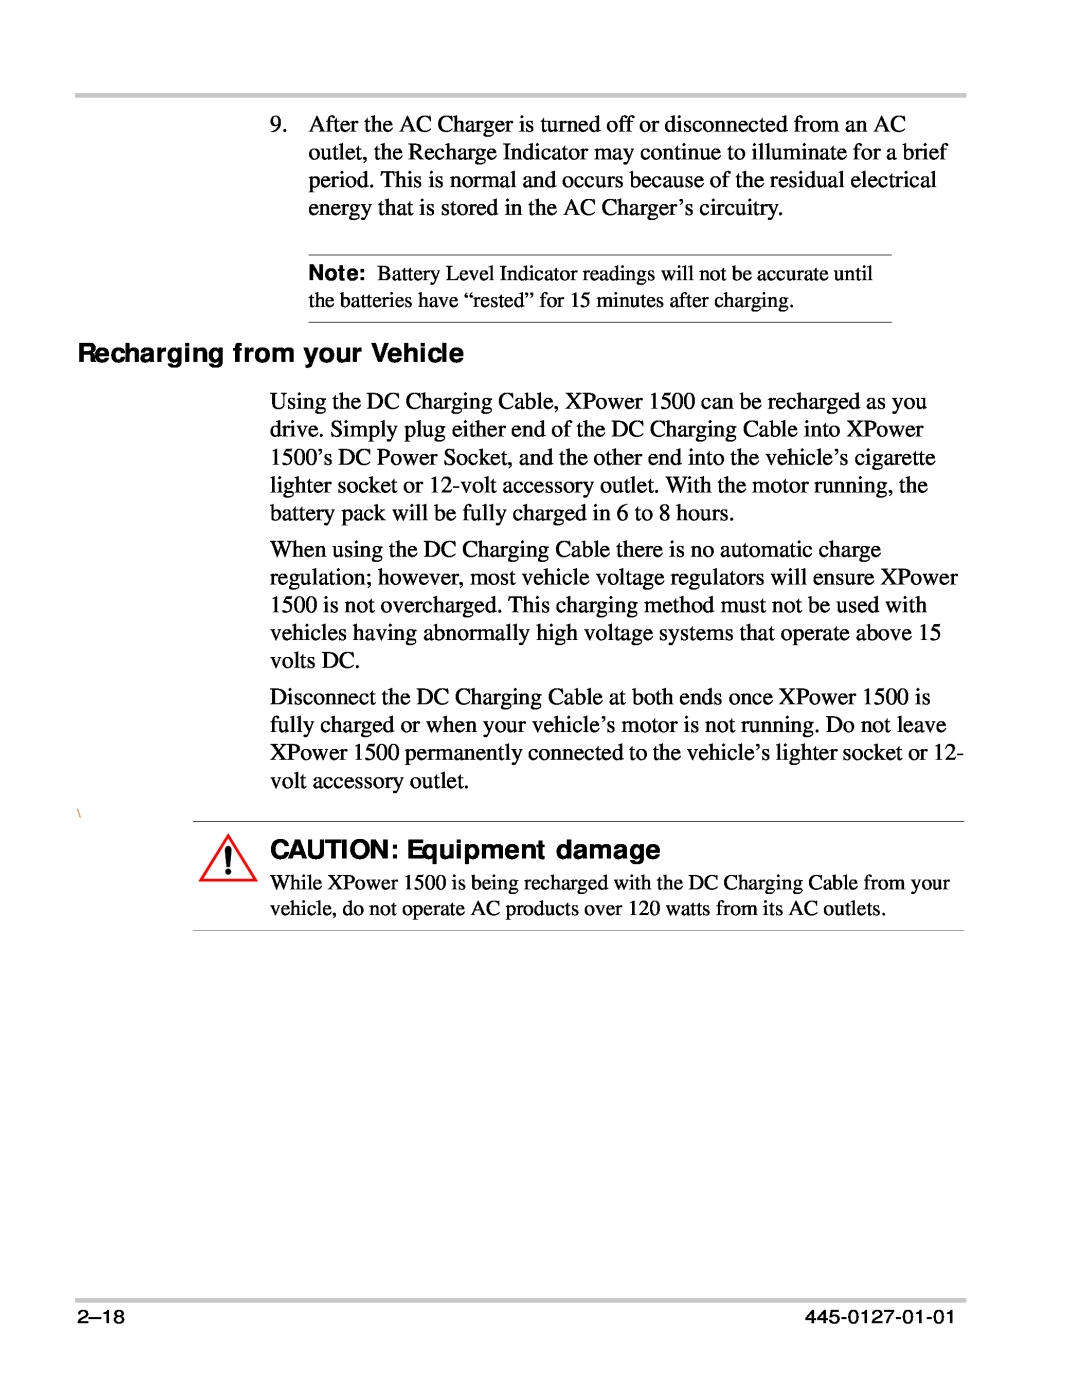 Xantrex Technology 1500 manual Recharging from your Vehicle, CAUTION Equipment damage, 2-18, 445-0127-01-01 